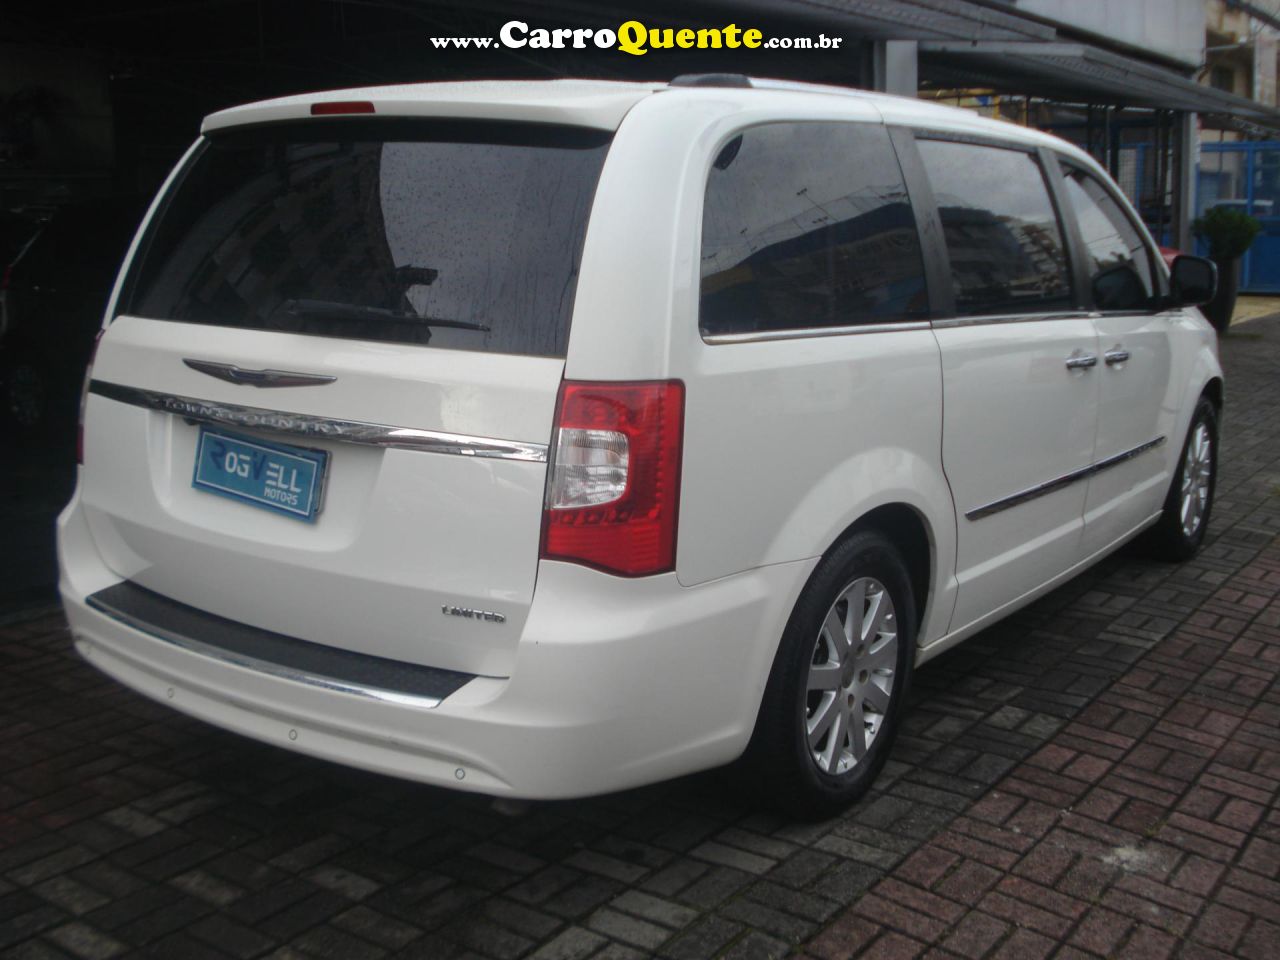 CHRYSLER   TOWN & COUNTRY LIMITED 3.8 3.6 V6 AUT.   BRANCO 2012 3.8 GASOLINA - Loja